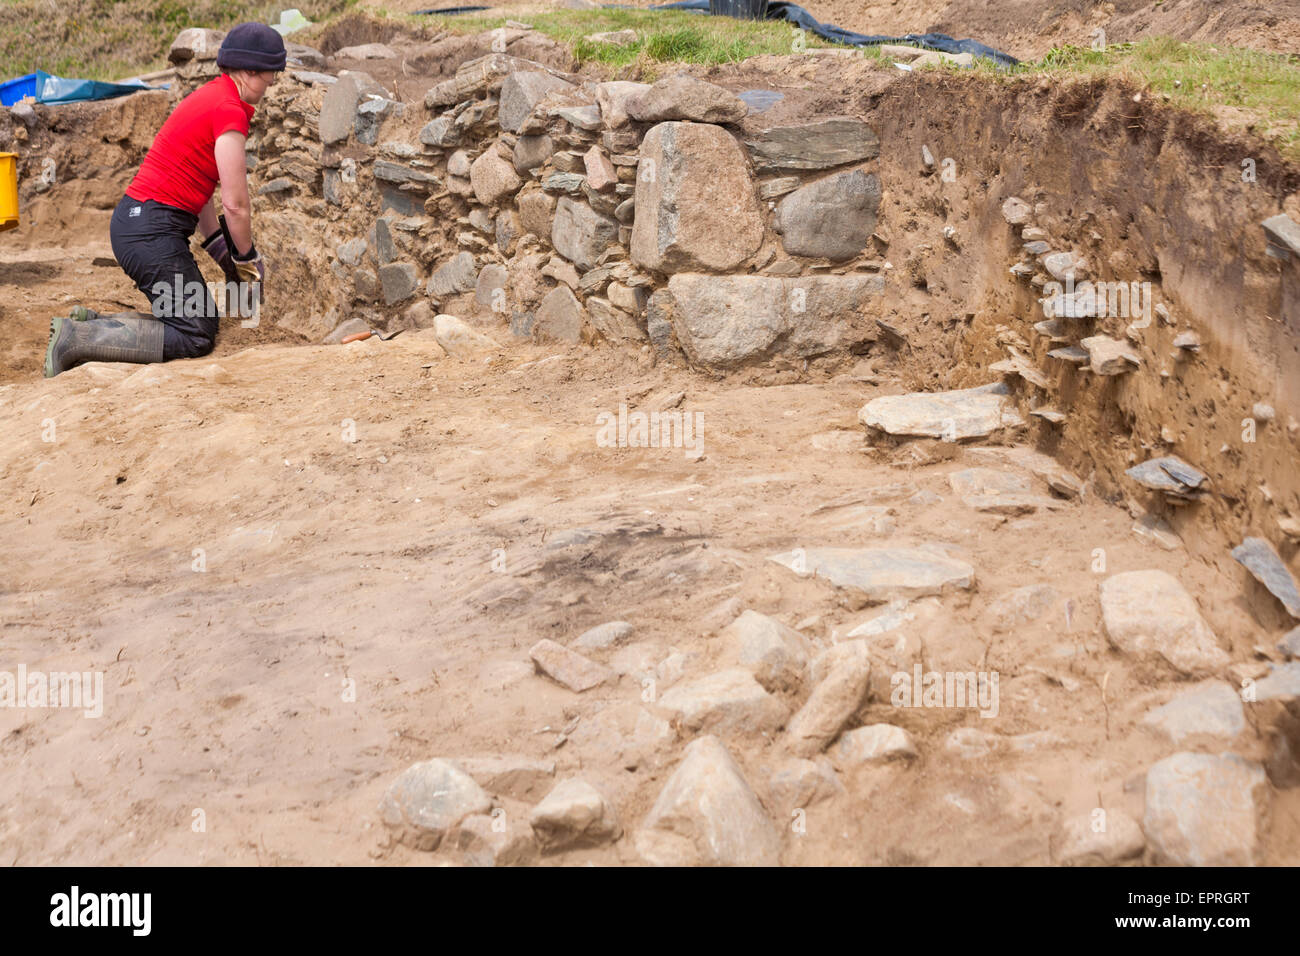 Excavation works at Whitesands Bay, Pembrokeshire Coast National Park, Wales, UK in May - woman excavating Stock Photo